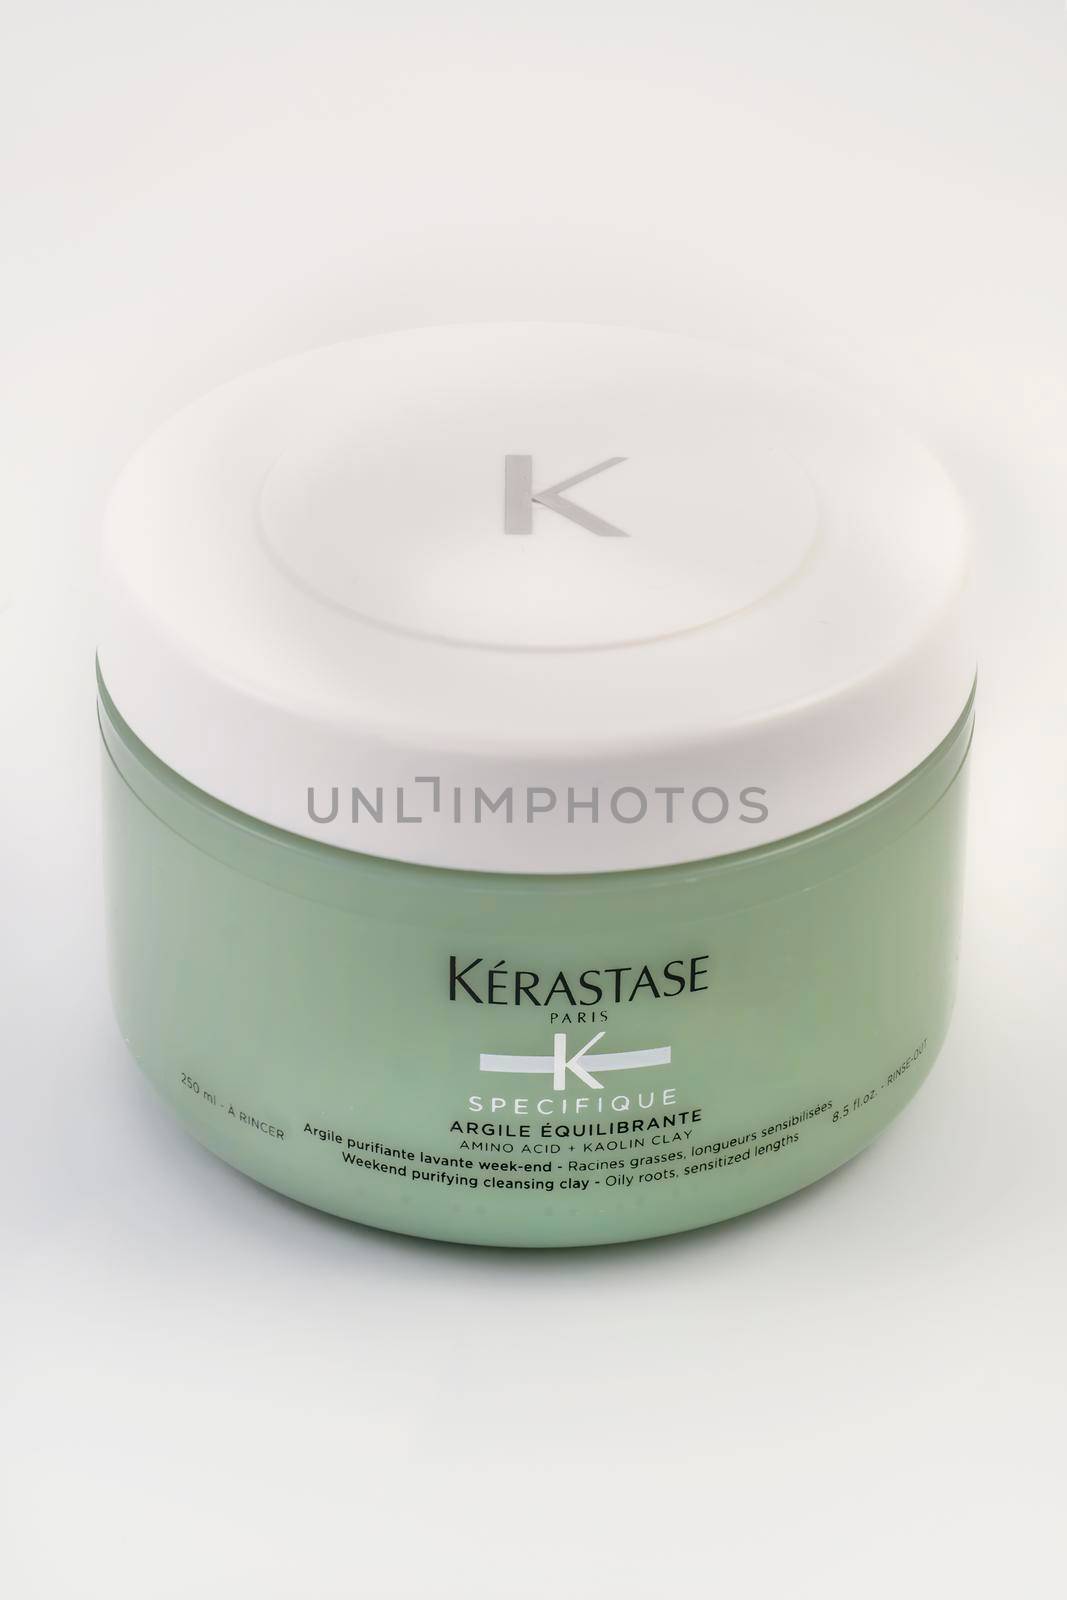 Thessaloniki, Greece - October 26 2022: Kerastase Paris Specifique Argile Equilibrante hair detox clay amino acid shampoo on 250 ml container that cleanses and purifies the scalp, on white background.